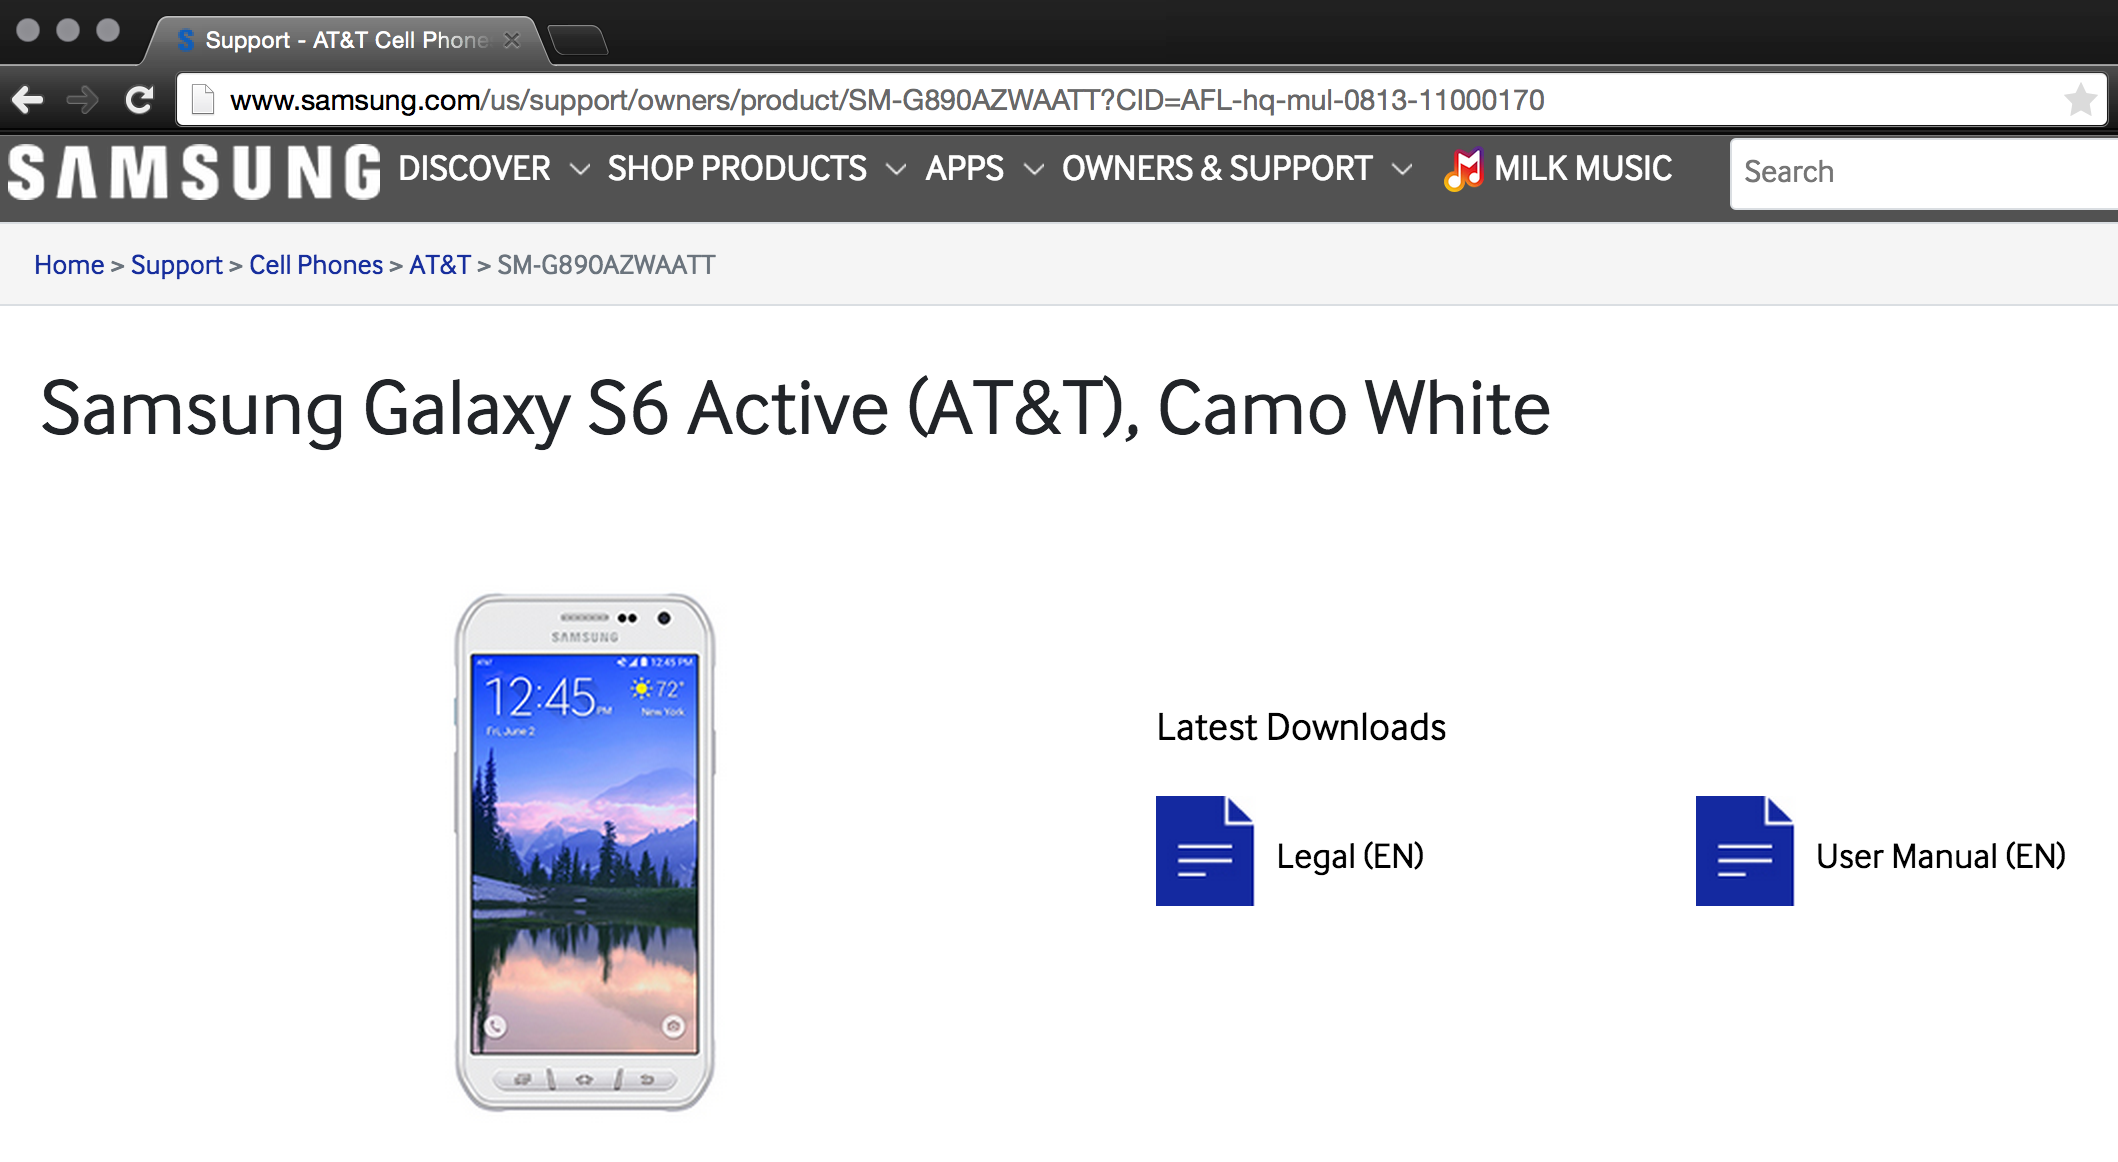 Galaxy S6 Active revealed on Samsung website ahead of launch